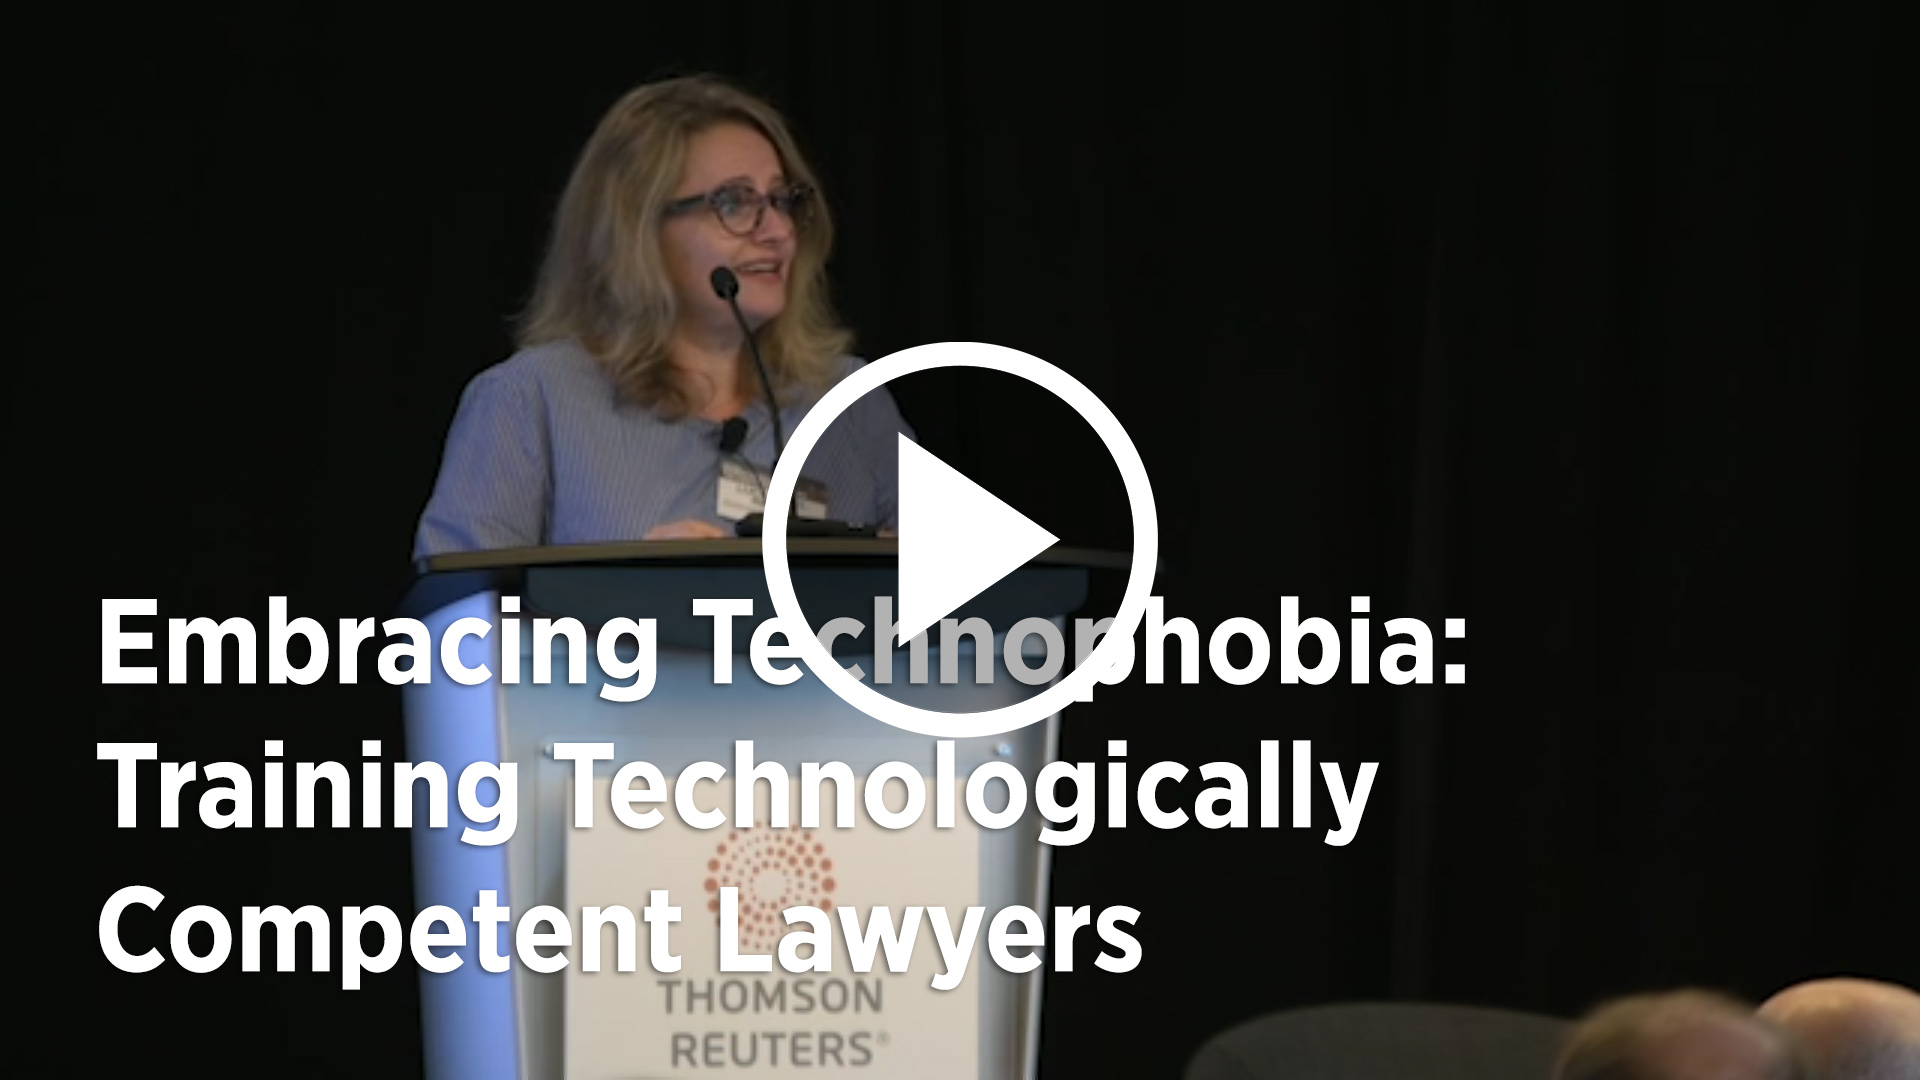 Embracing Technophobia: Training Technologically Competent Lawyers